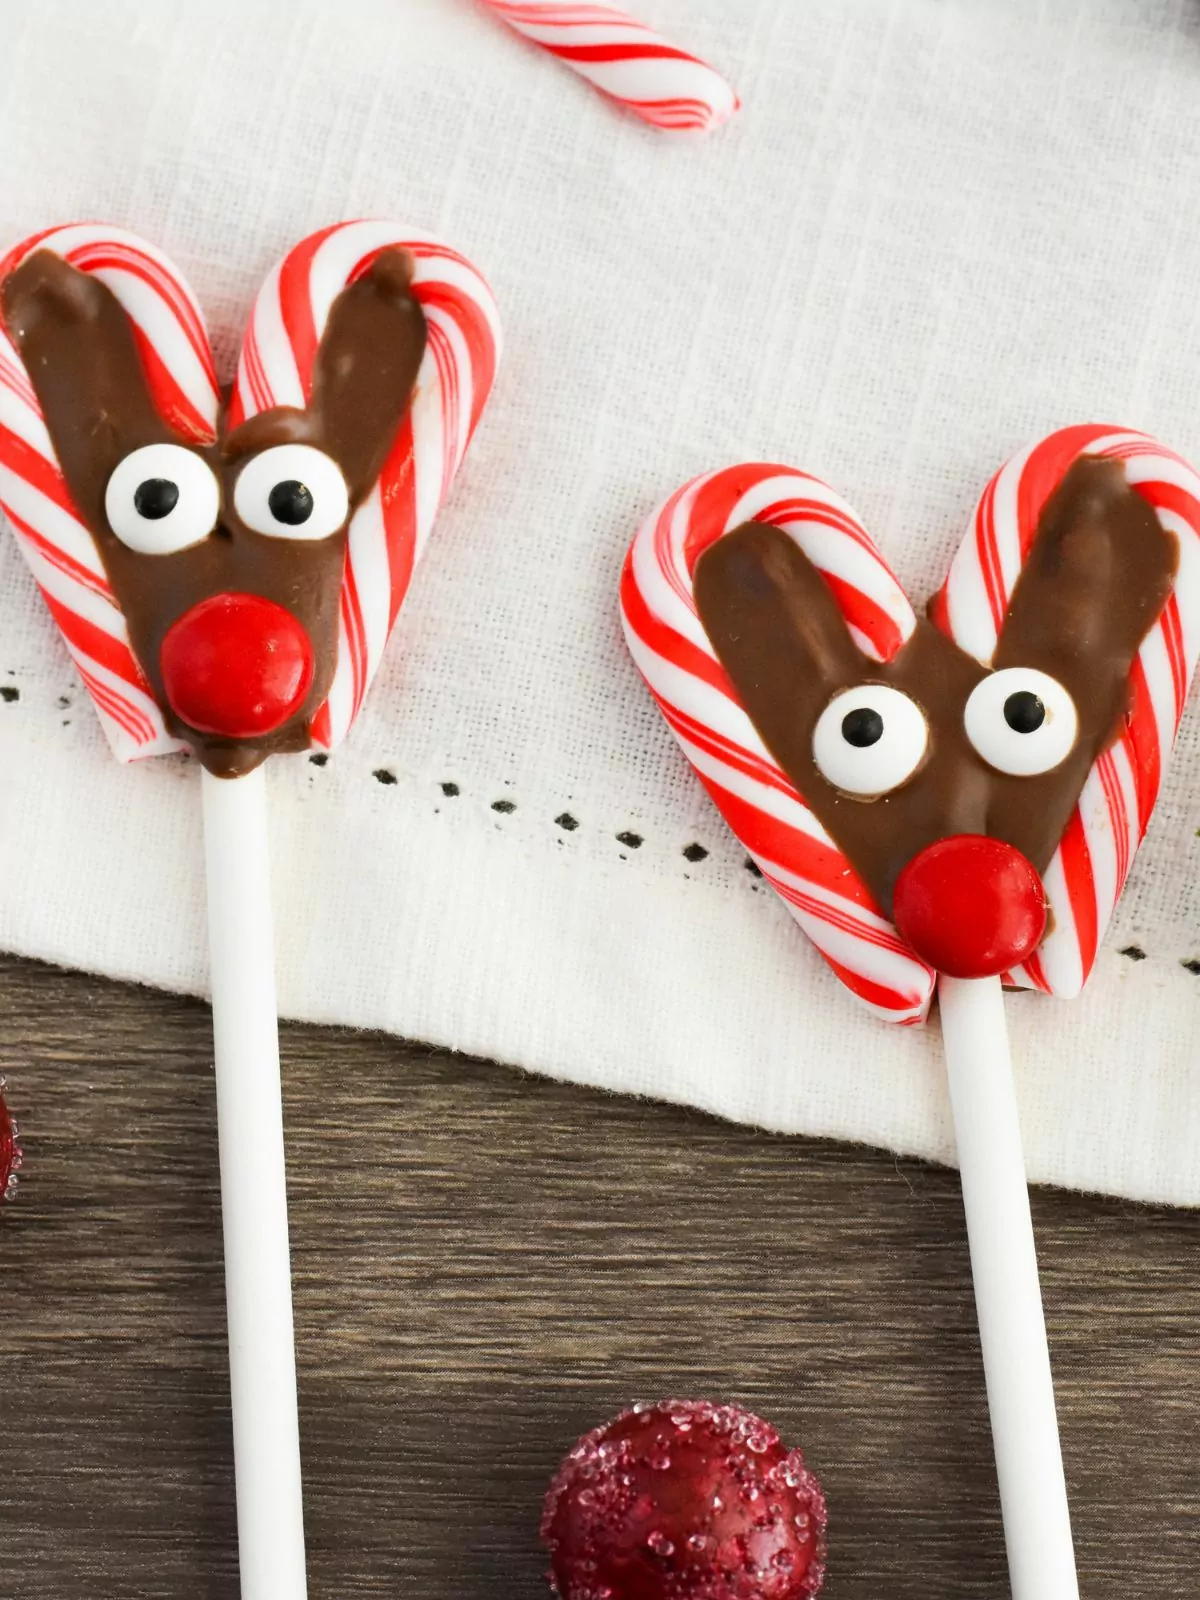 candy cane heart shaped lollipops decorated like reindeer.